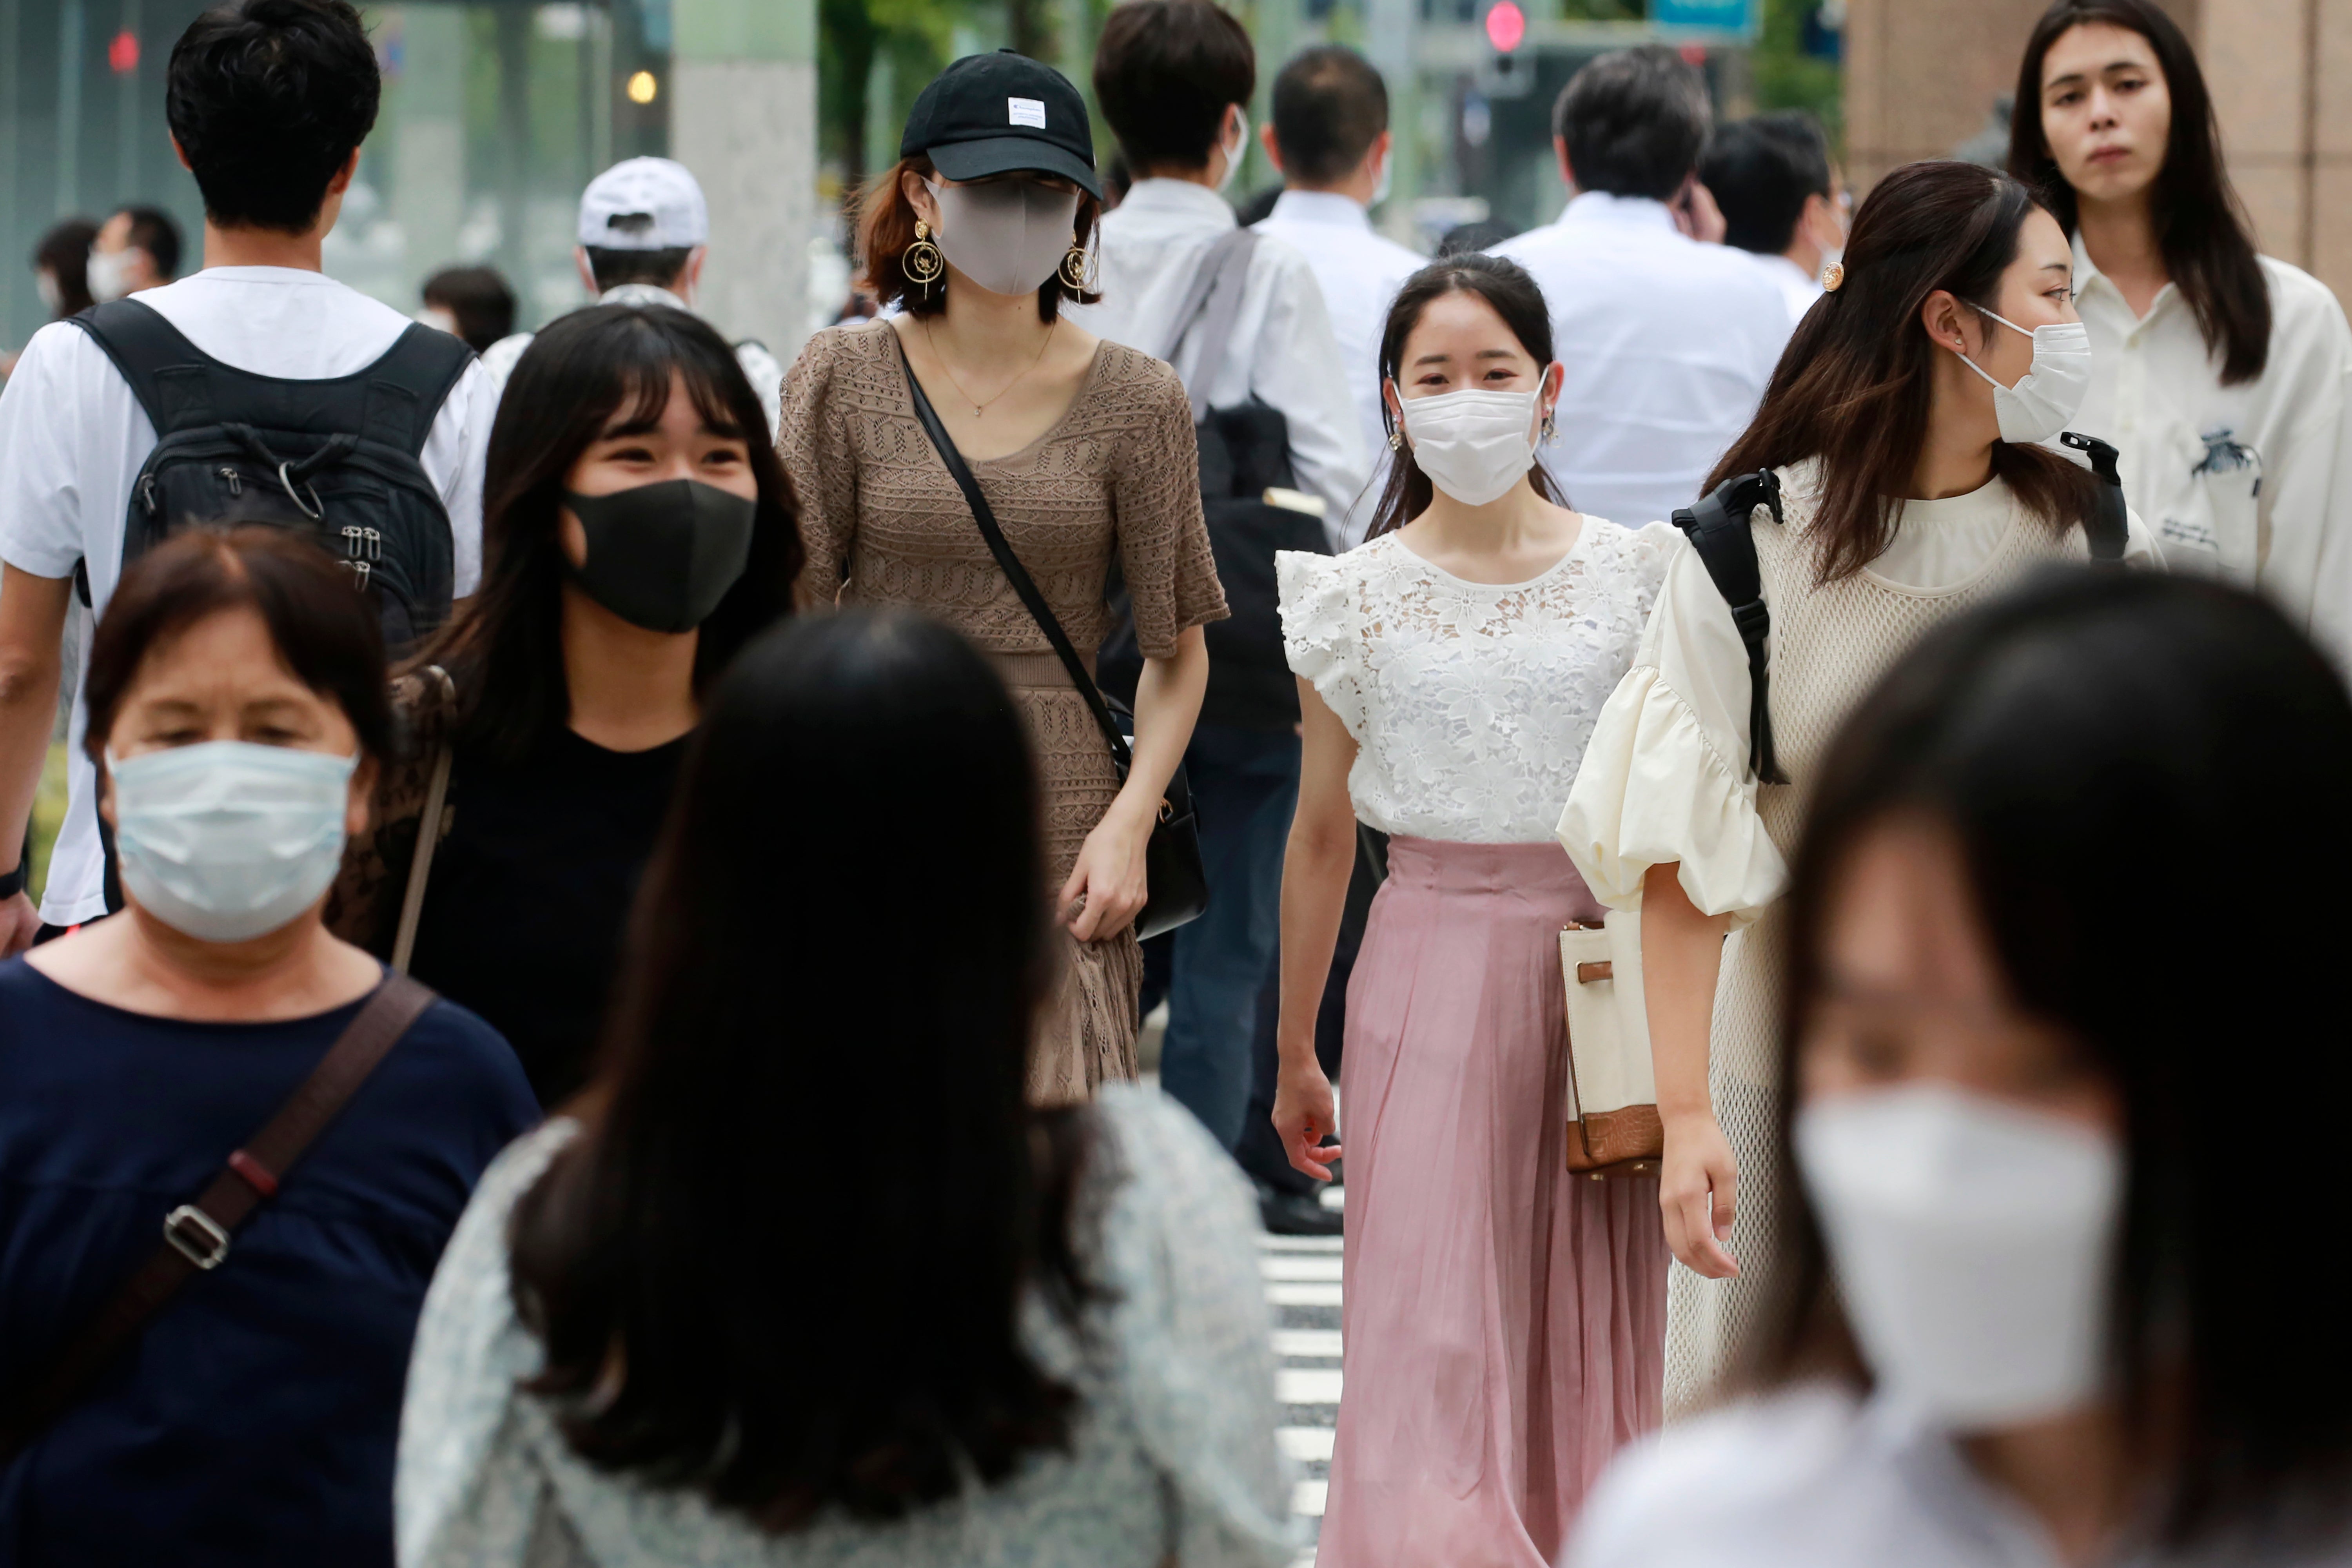 File: Daily Covid-19 infections have surged by at least 10 times since last month to 25,000 cases across Japan, with 5,000 cases reported from Tokyo